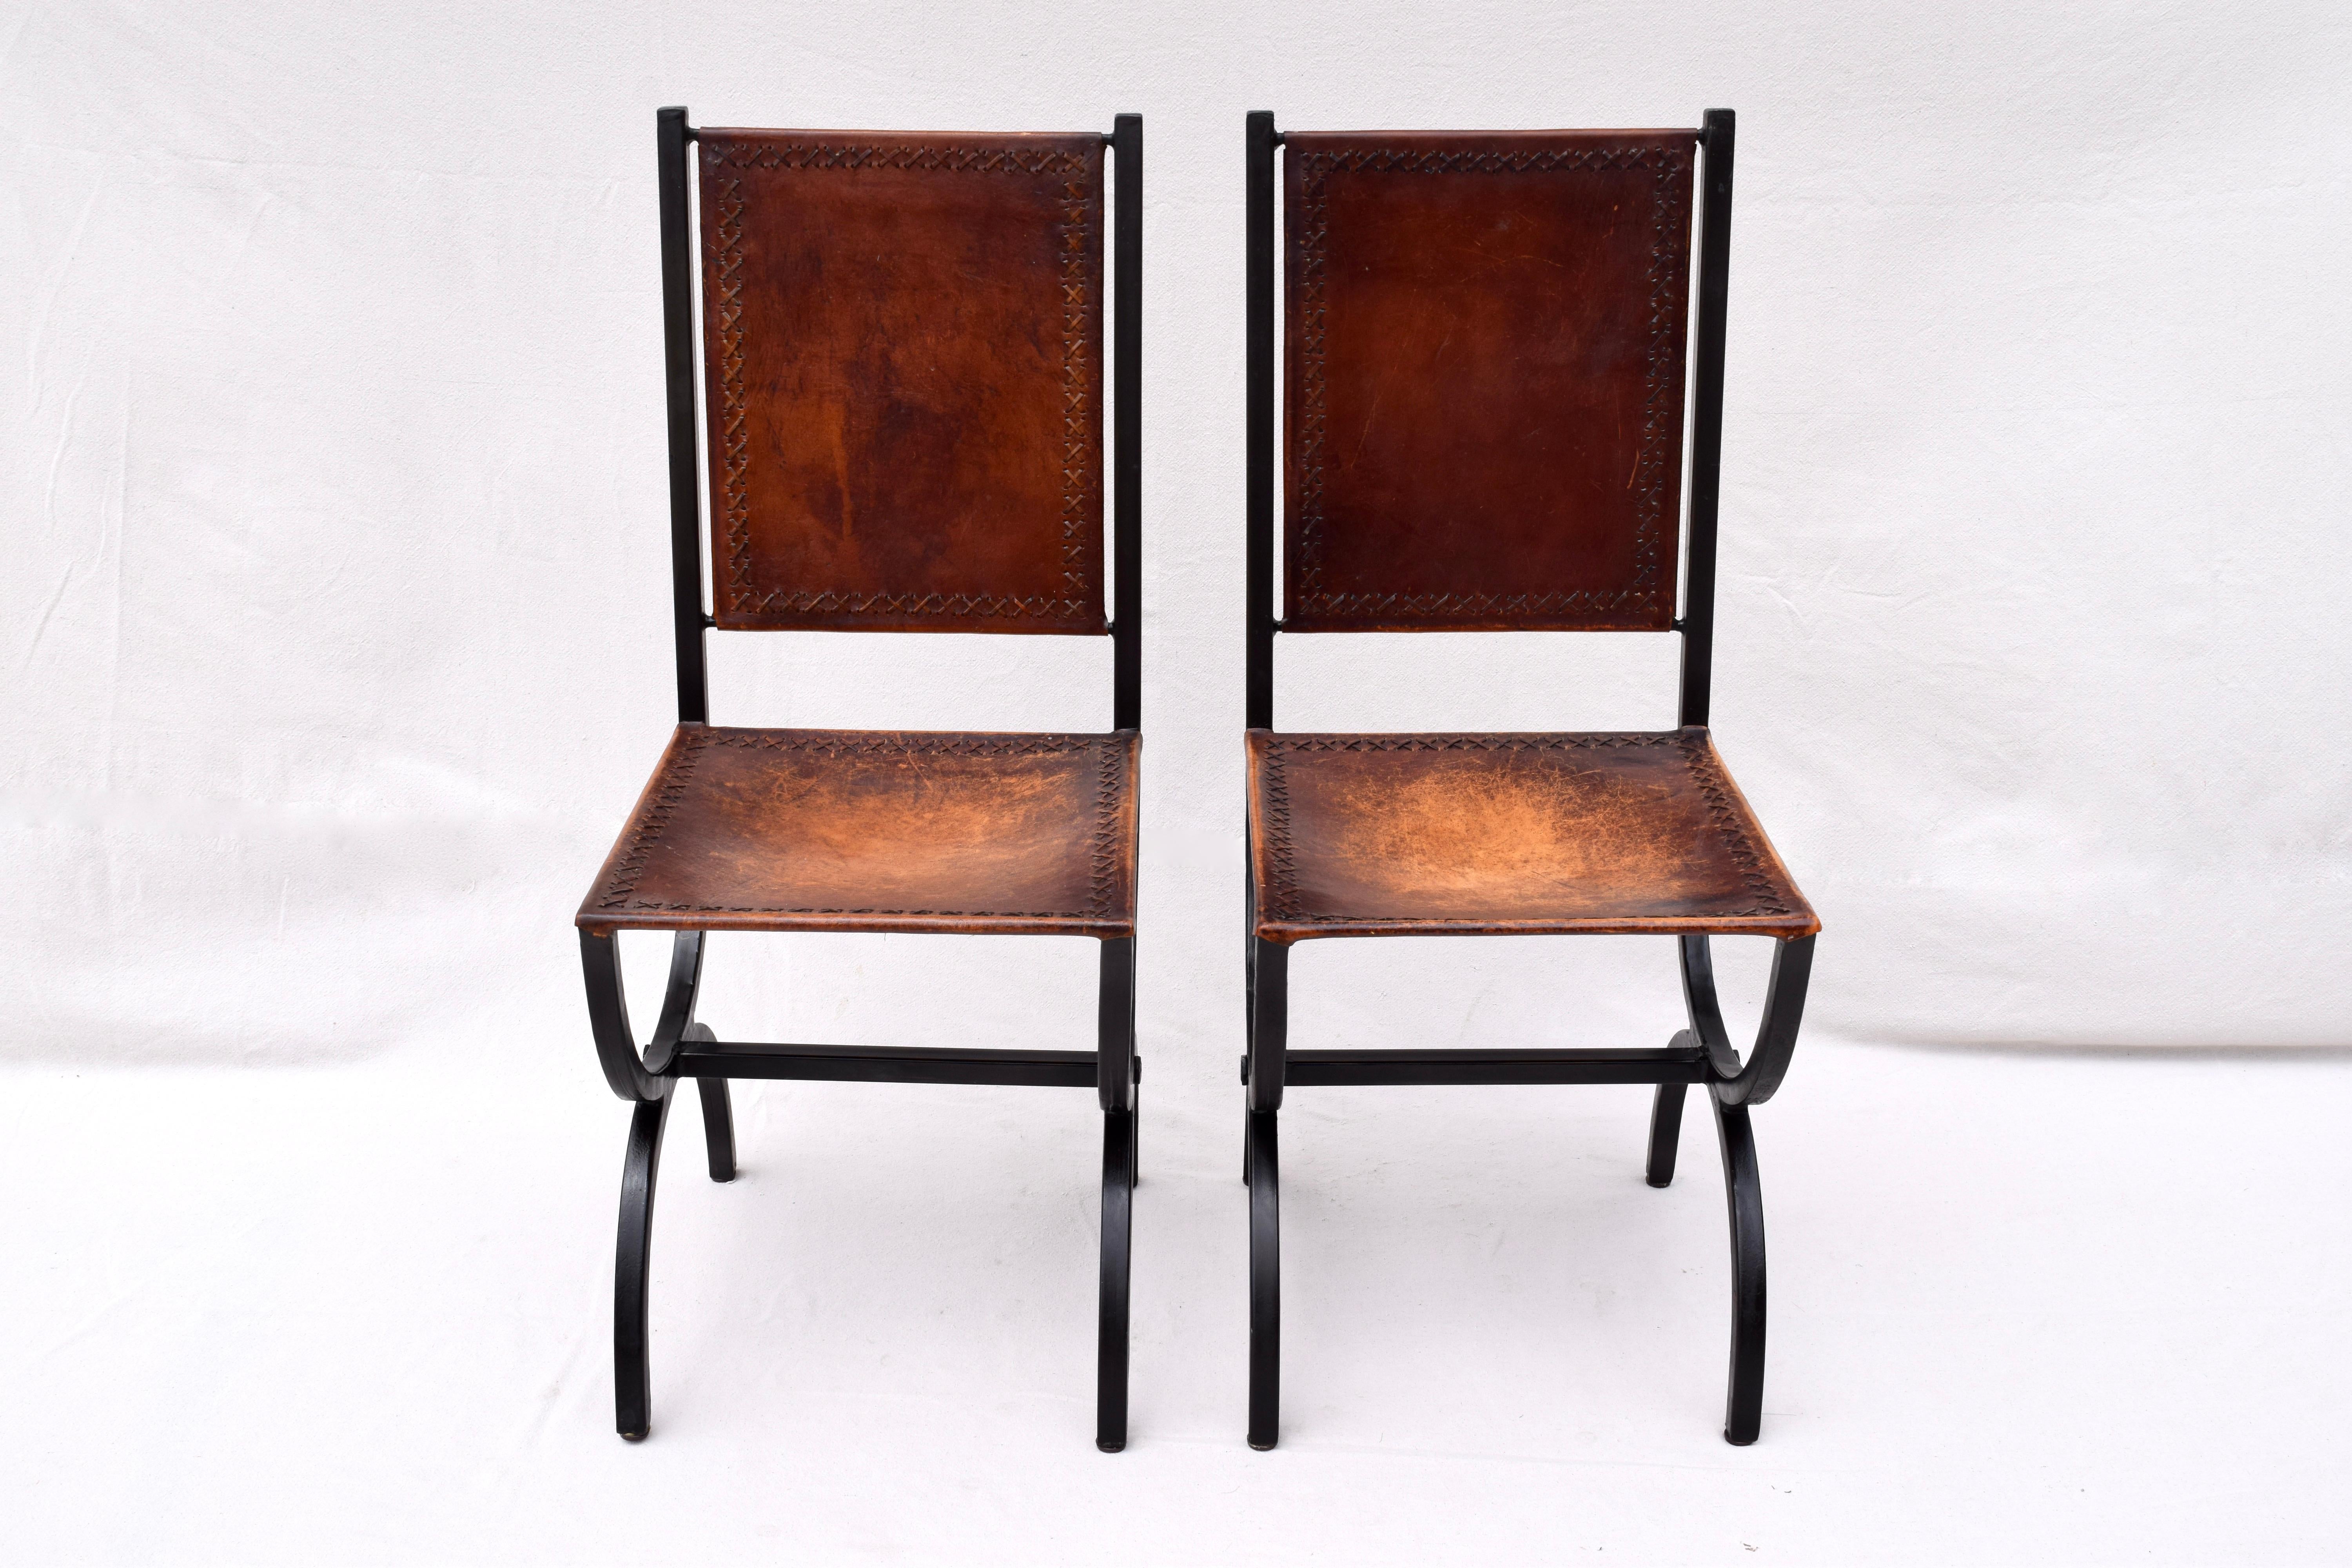 Rancho Monterey California NapaStyle Iron and Leather Curule Form Dining Chairs